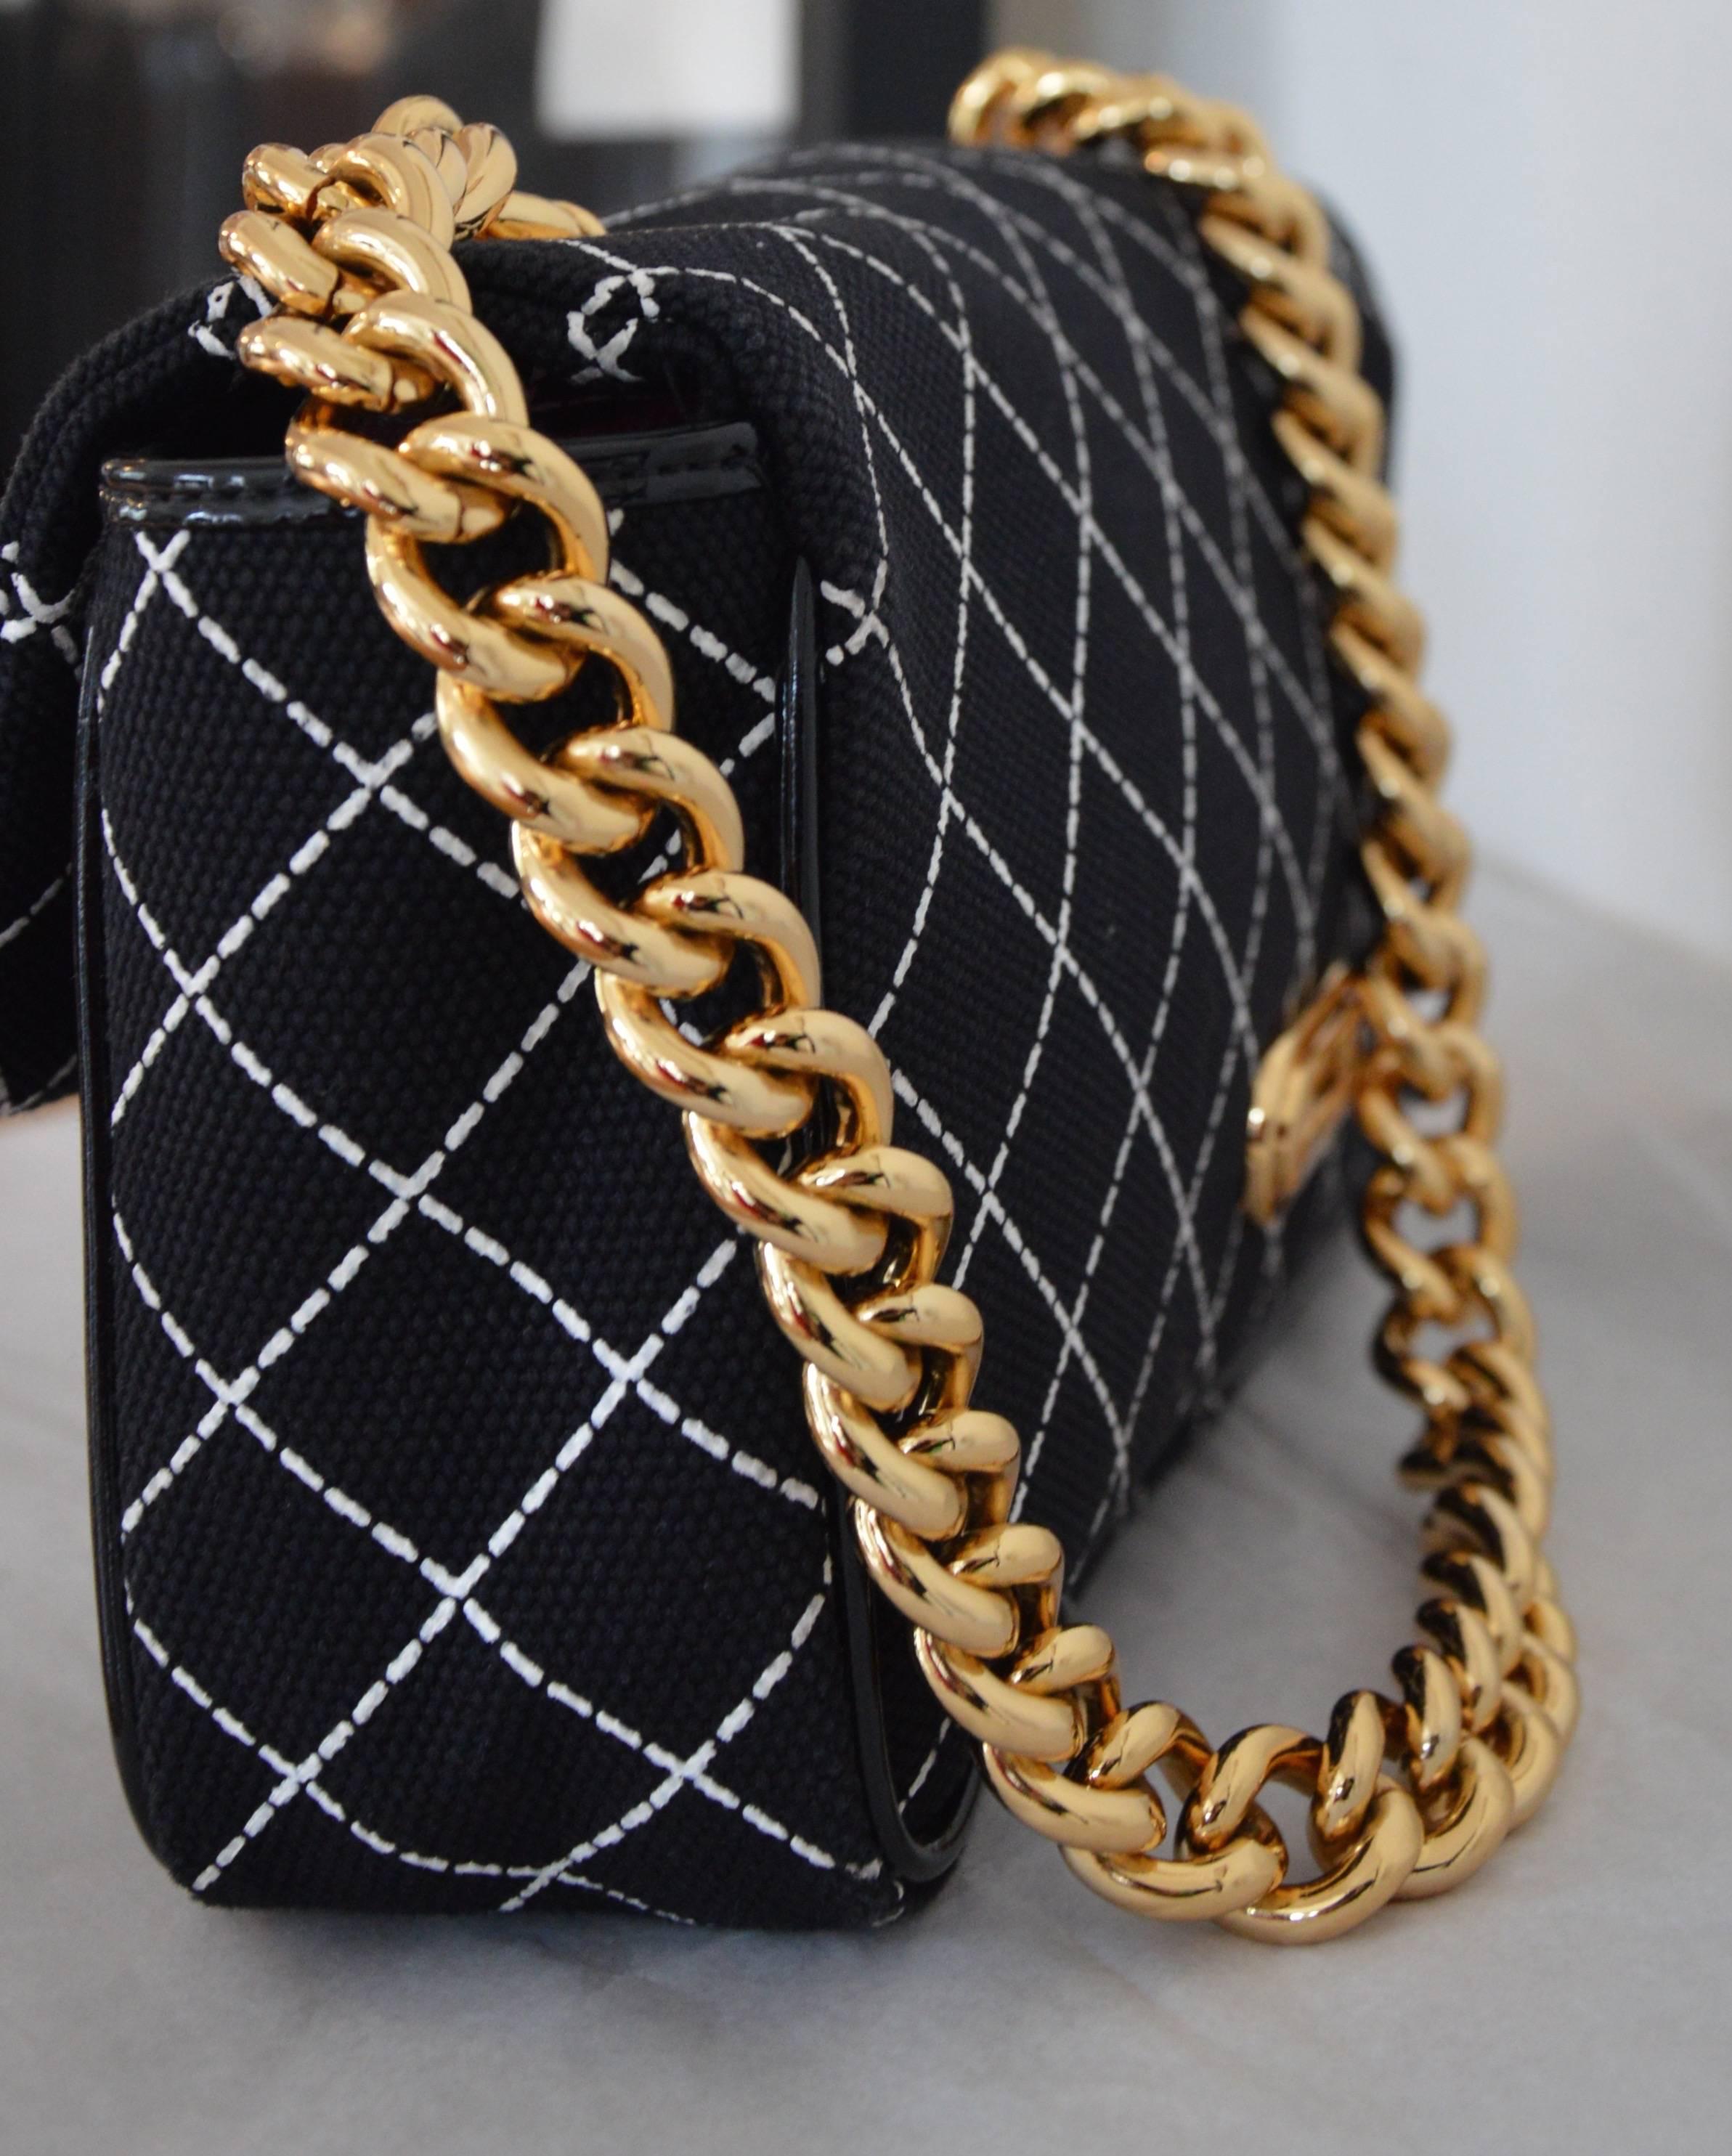 This Moschino Love bag is another magnificent work by the craftsmen at Moschino. It is a "faux semblant" quilted bag with just the bling needed with this important golded chain shoulder strap. This bag is sold out and not in production. 